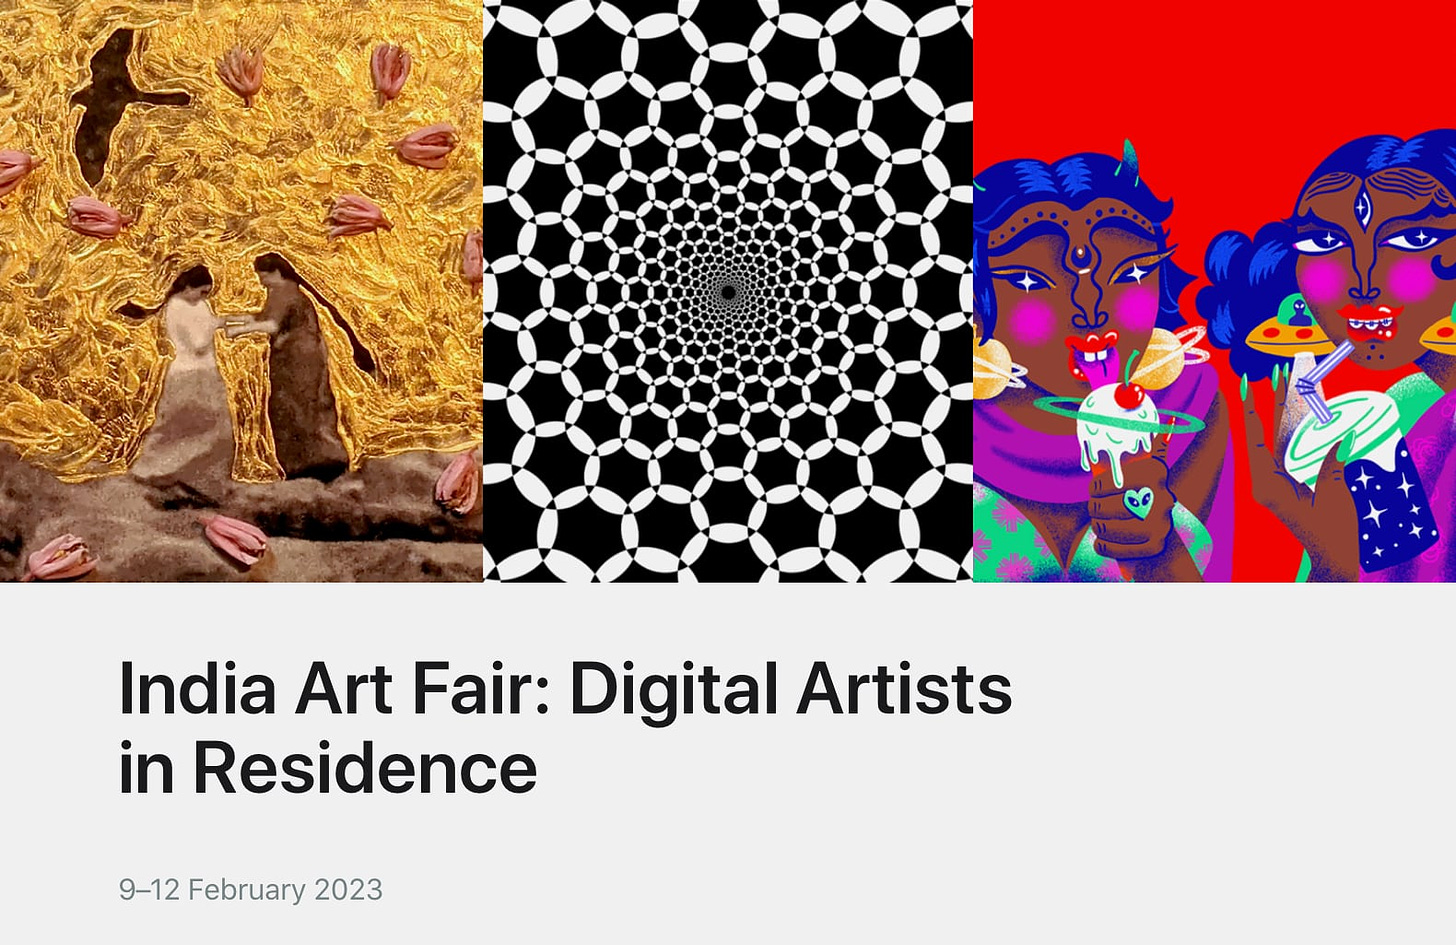 A screenshot of the India Art Fair Today at Apple registration page.